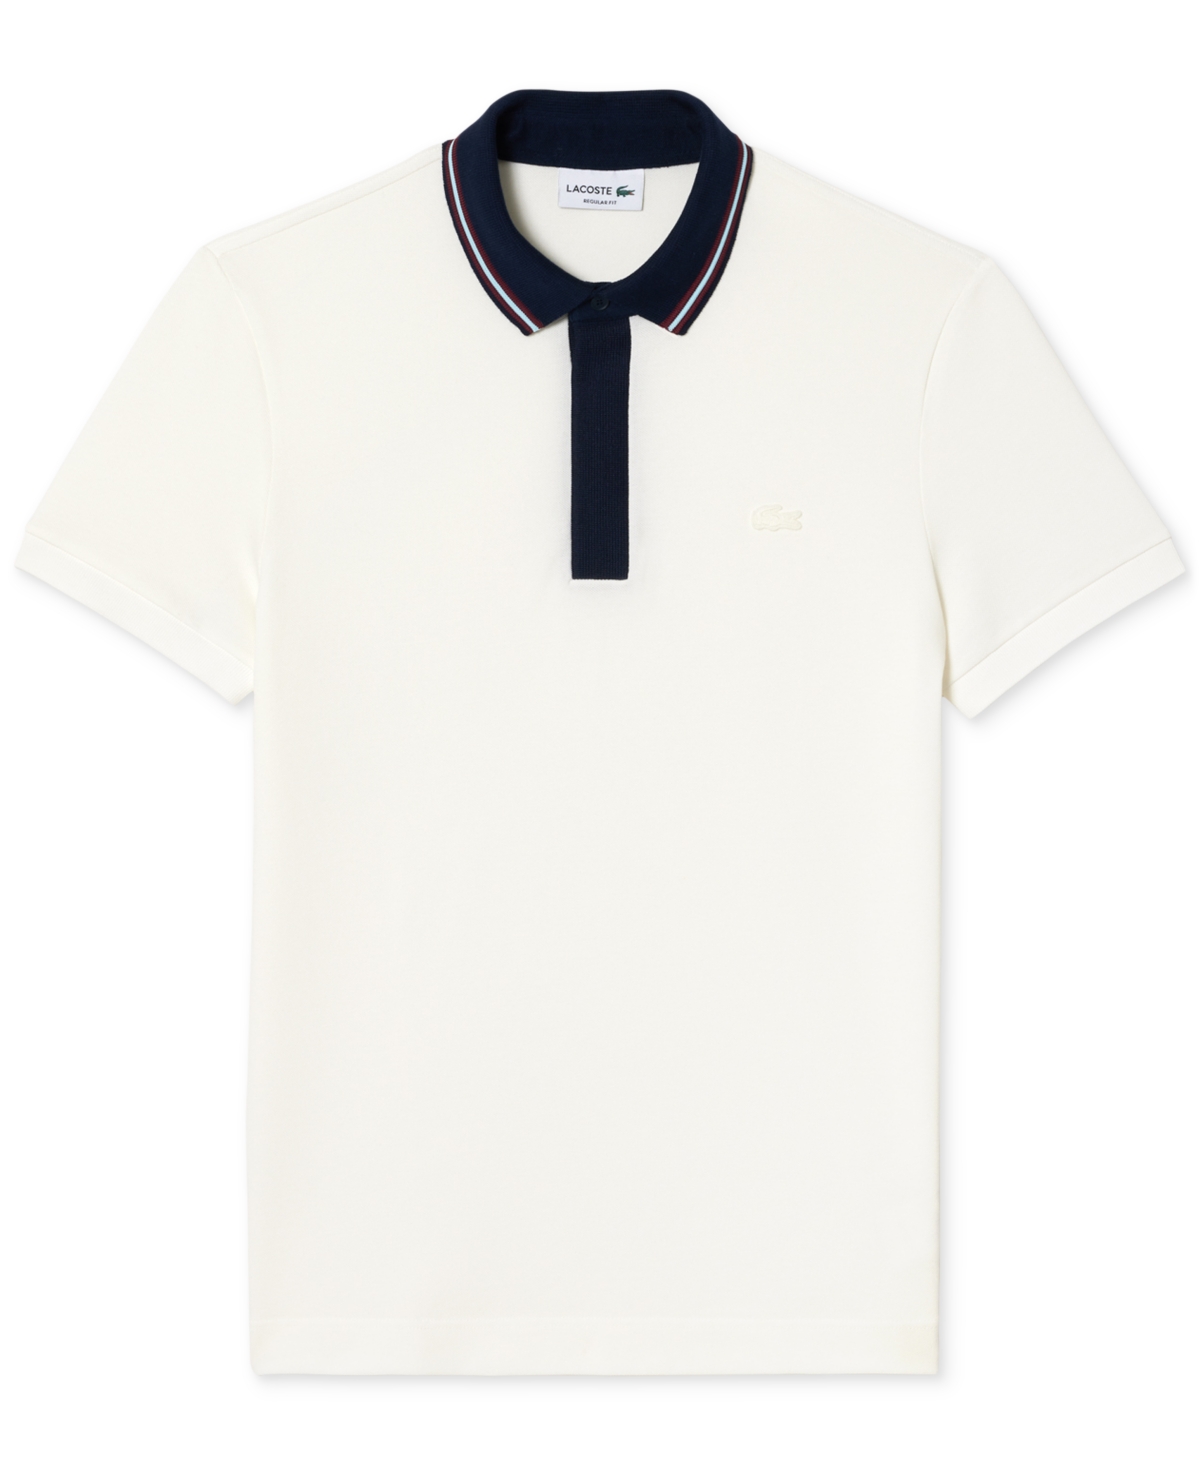 LACOSTE MEN'S REGULAR-FIT COLORBLOCKED POLO